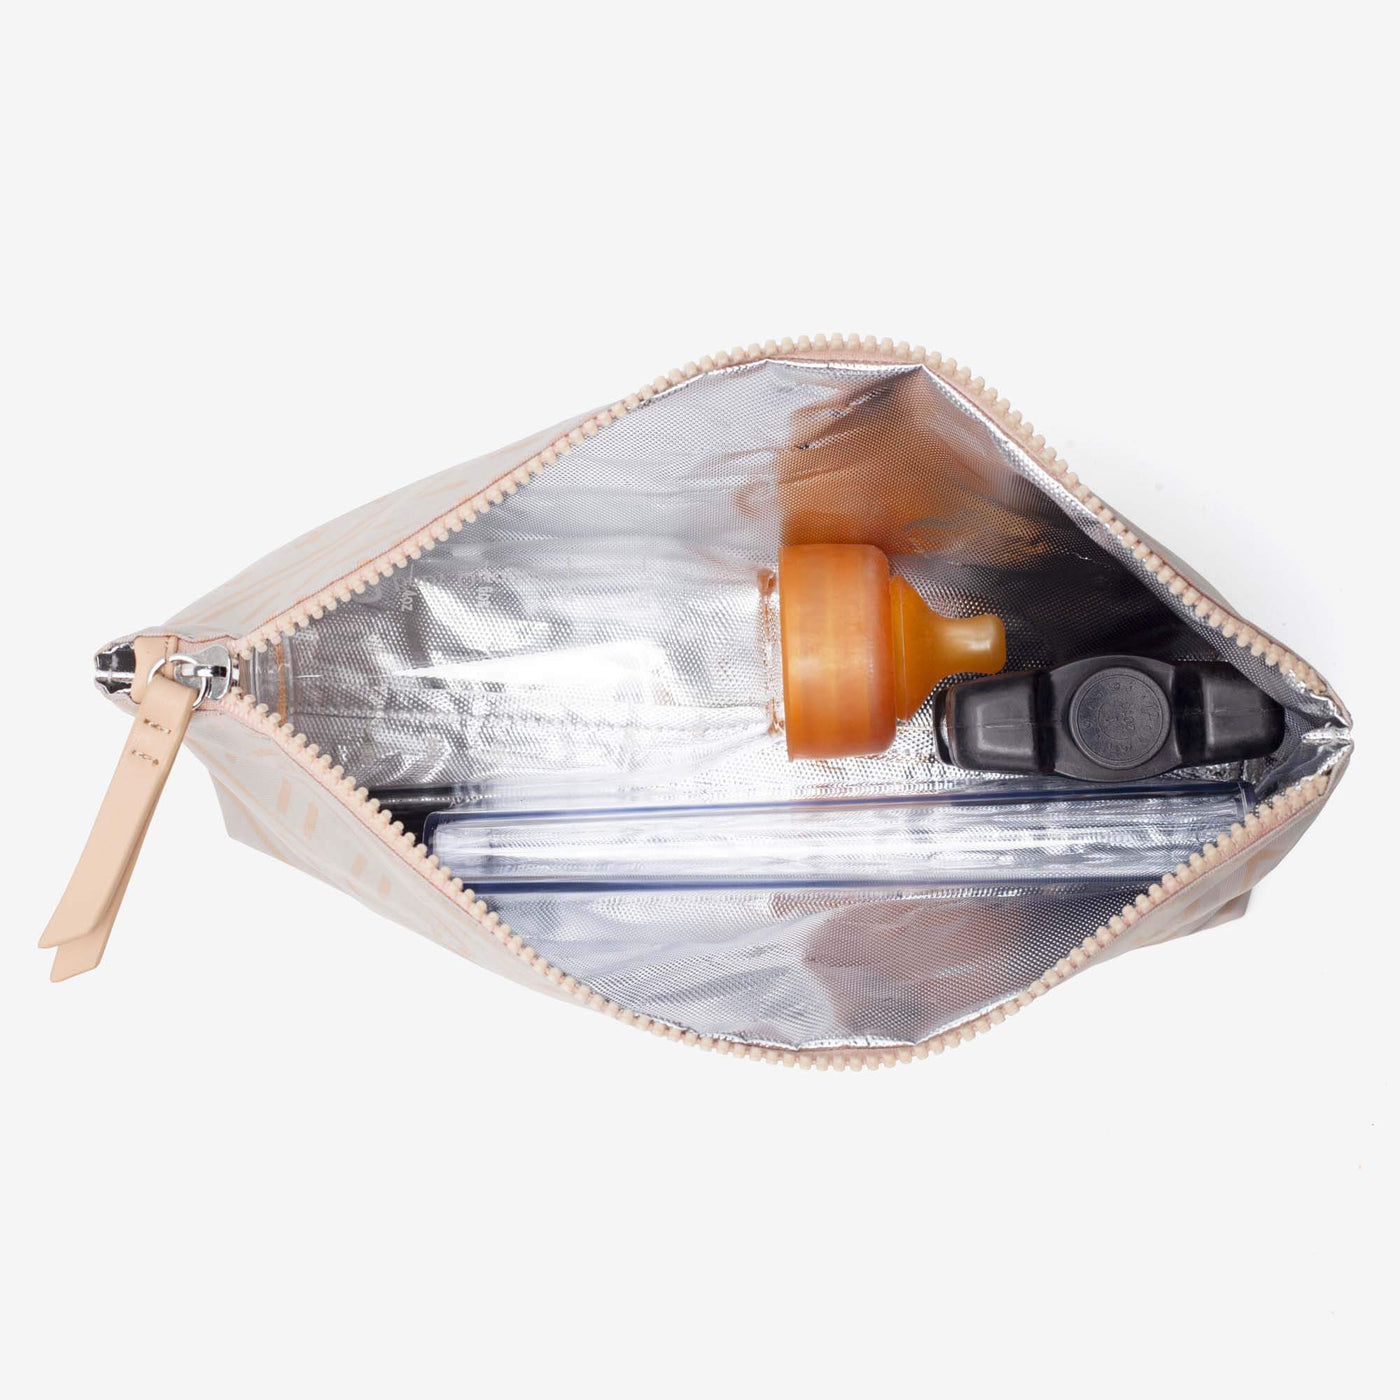 Insulated Waterproof Packing Pouch